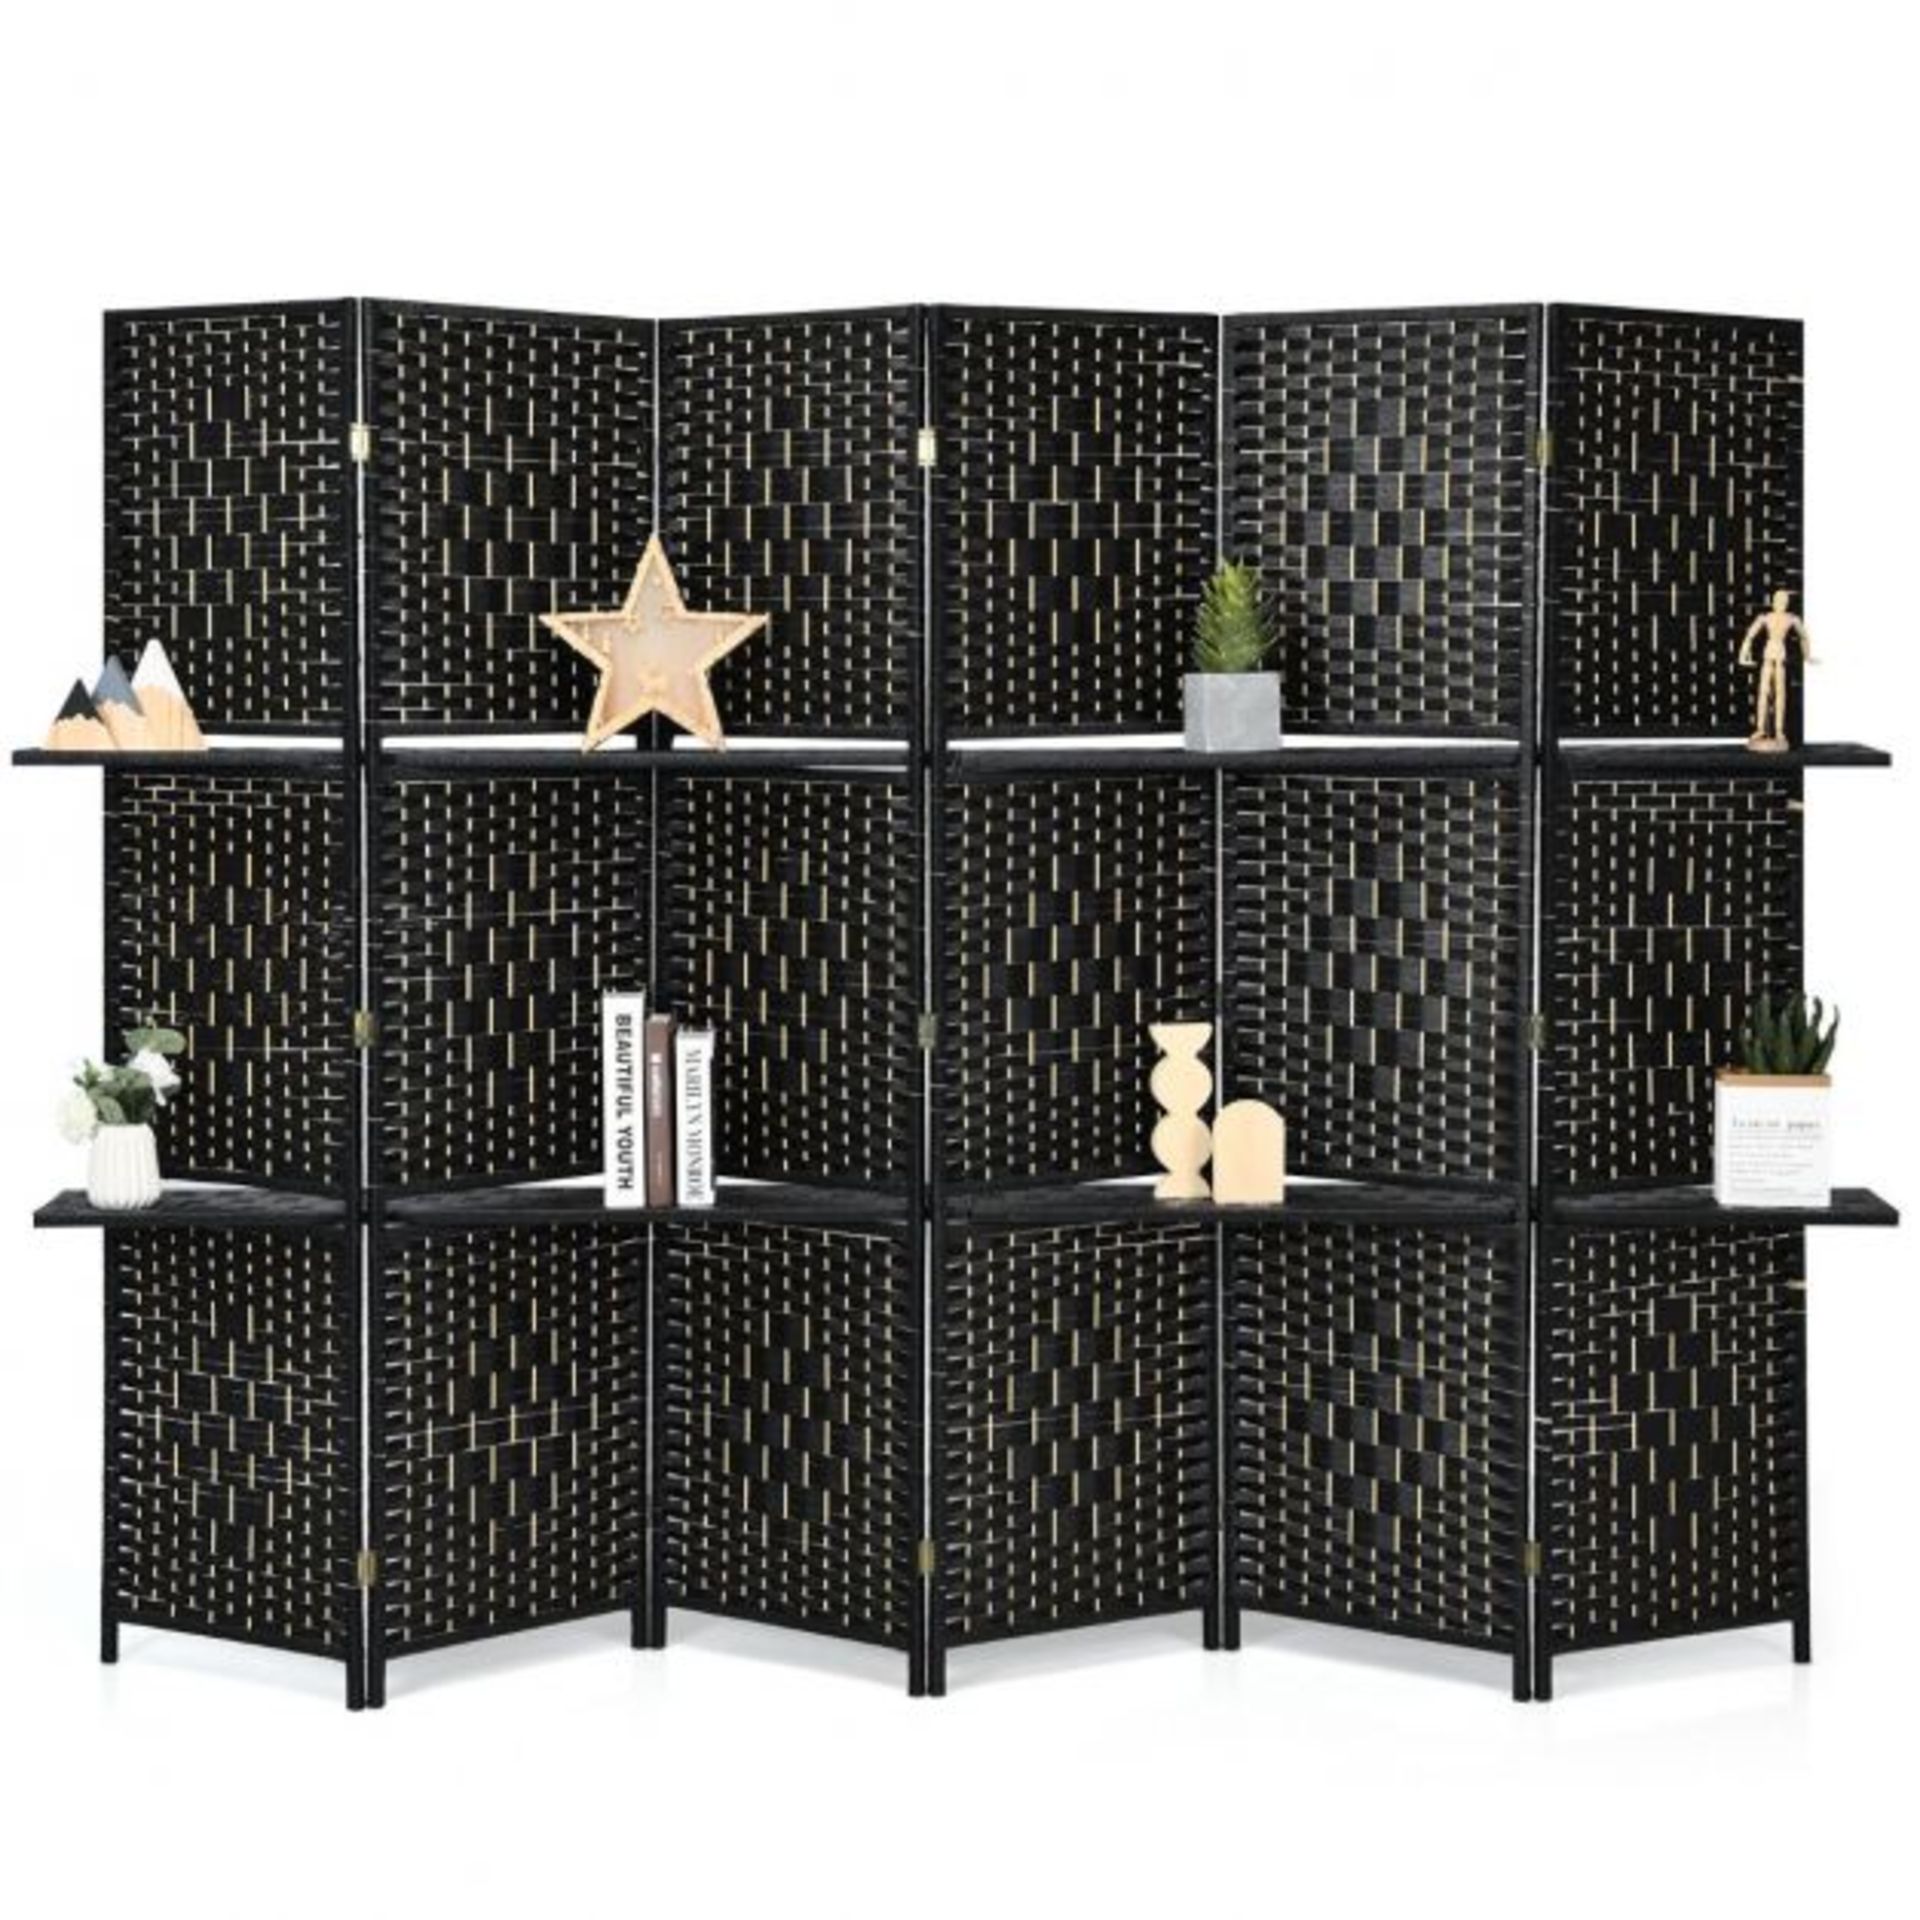 6 Panel Freestanding Folding Room Divider with Removable Shelves - RRP £178.99 (LOCATION - H/S R 4.